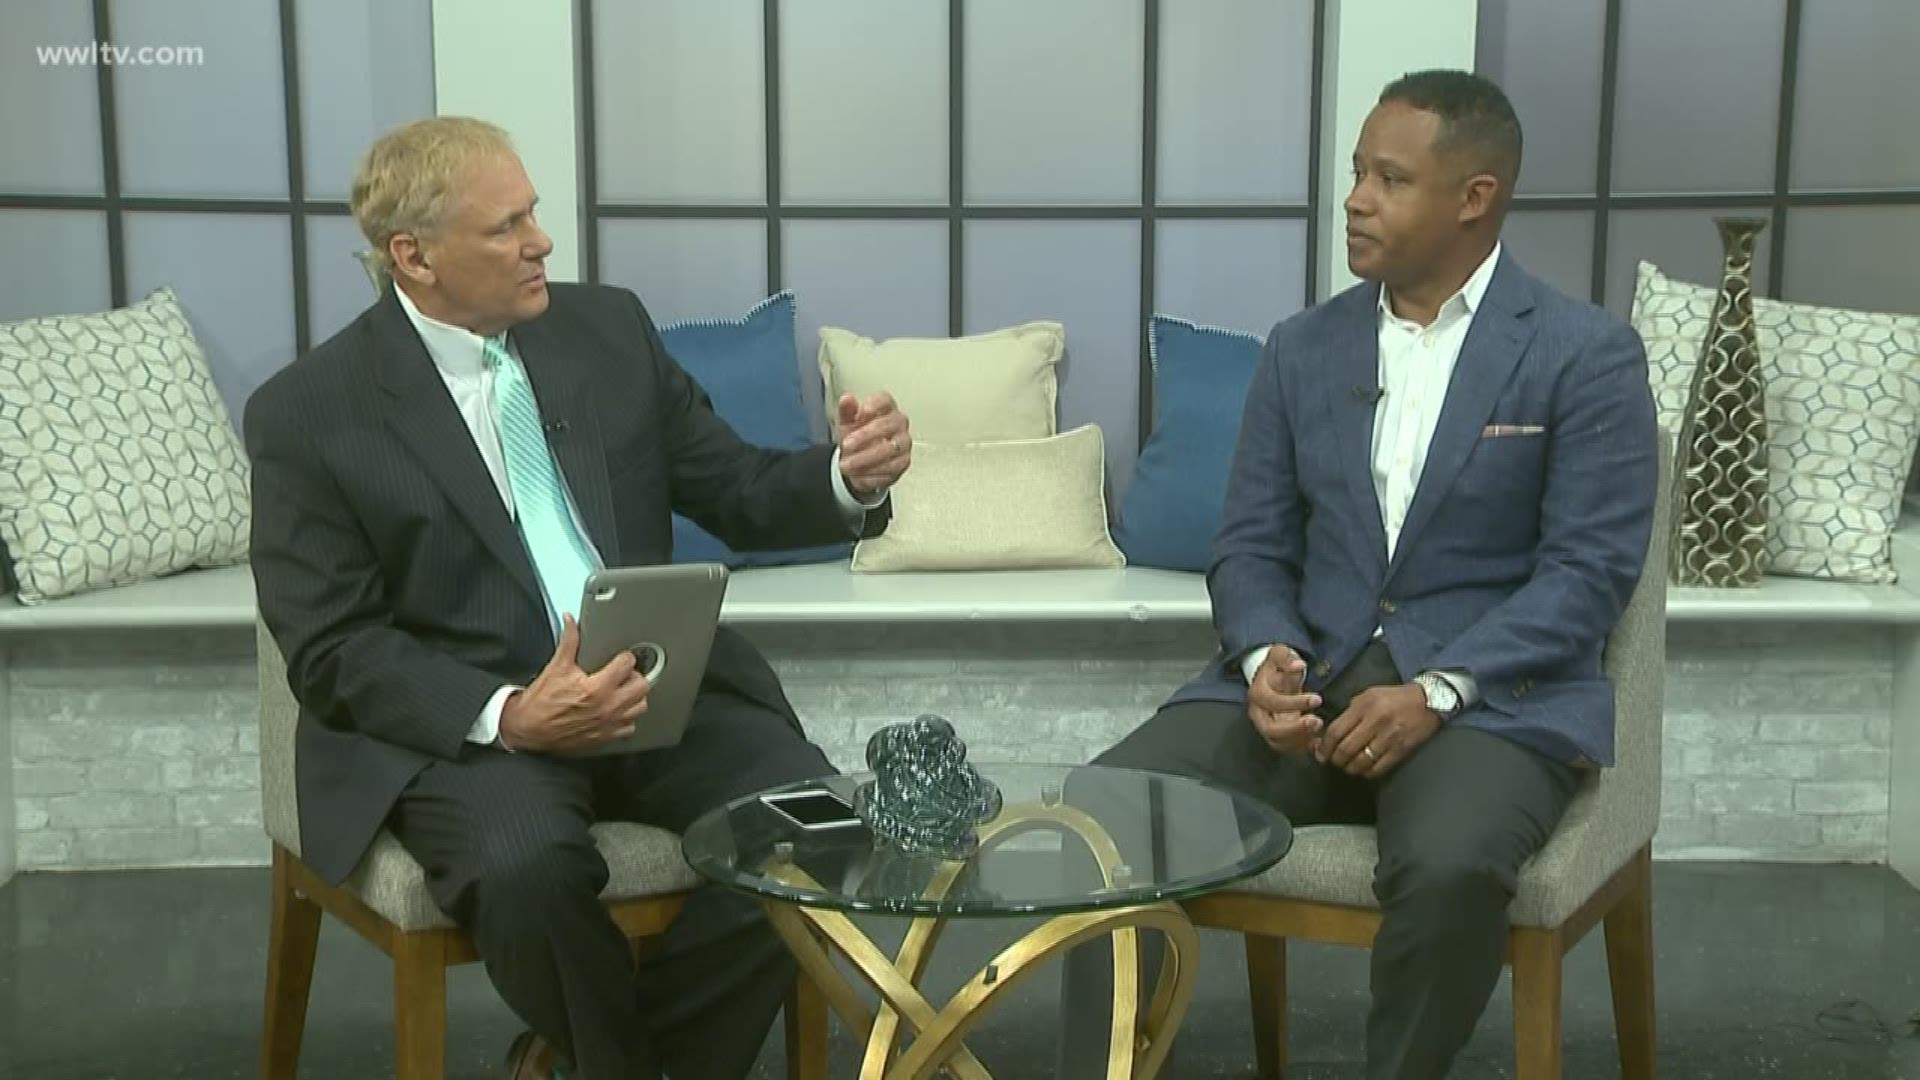 Former U.S. Attorney Kenneth Polite explains how young offenders can benefit from intervention and family support.